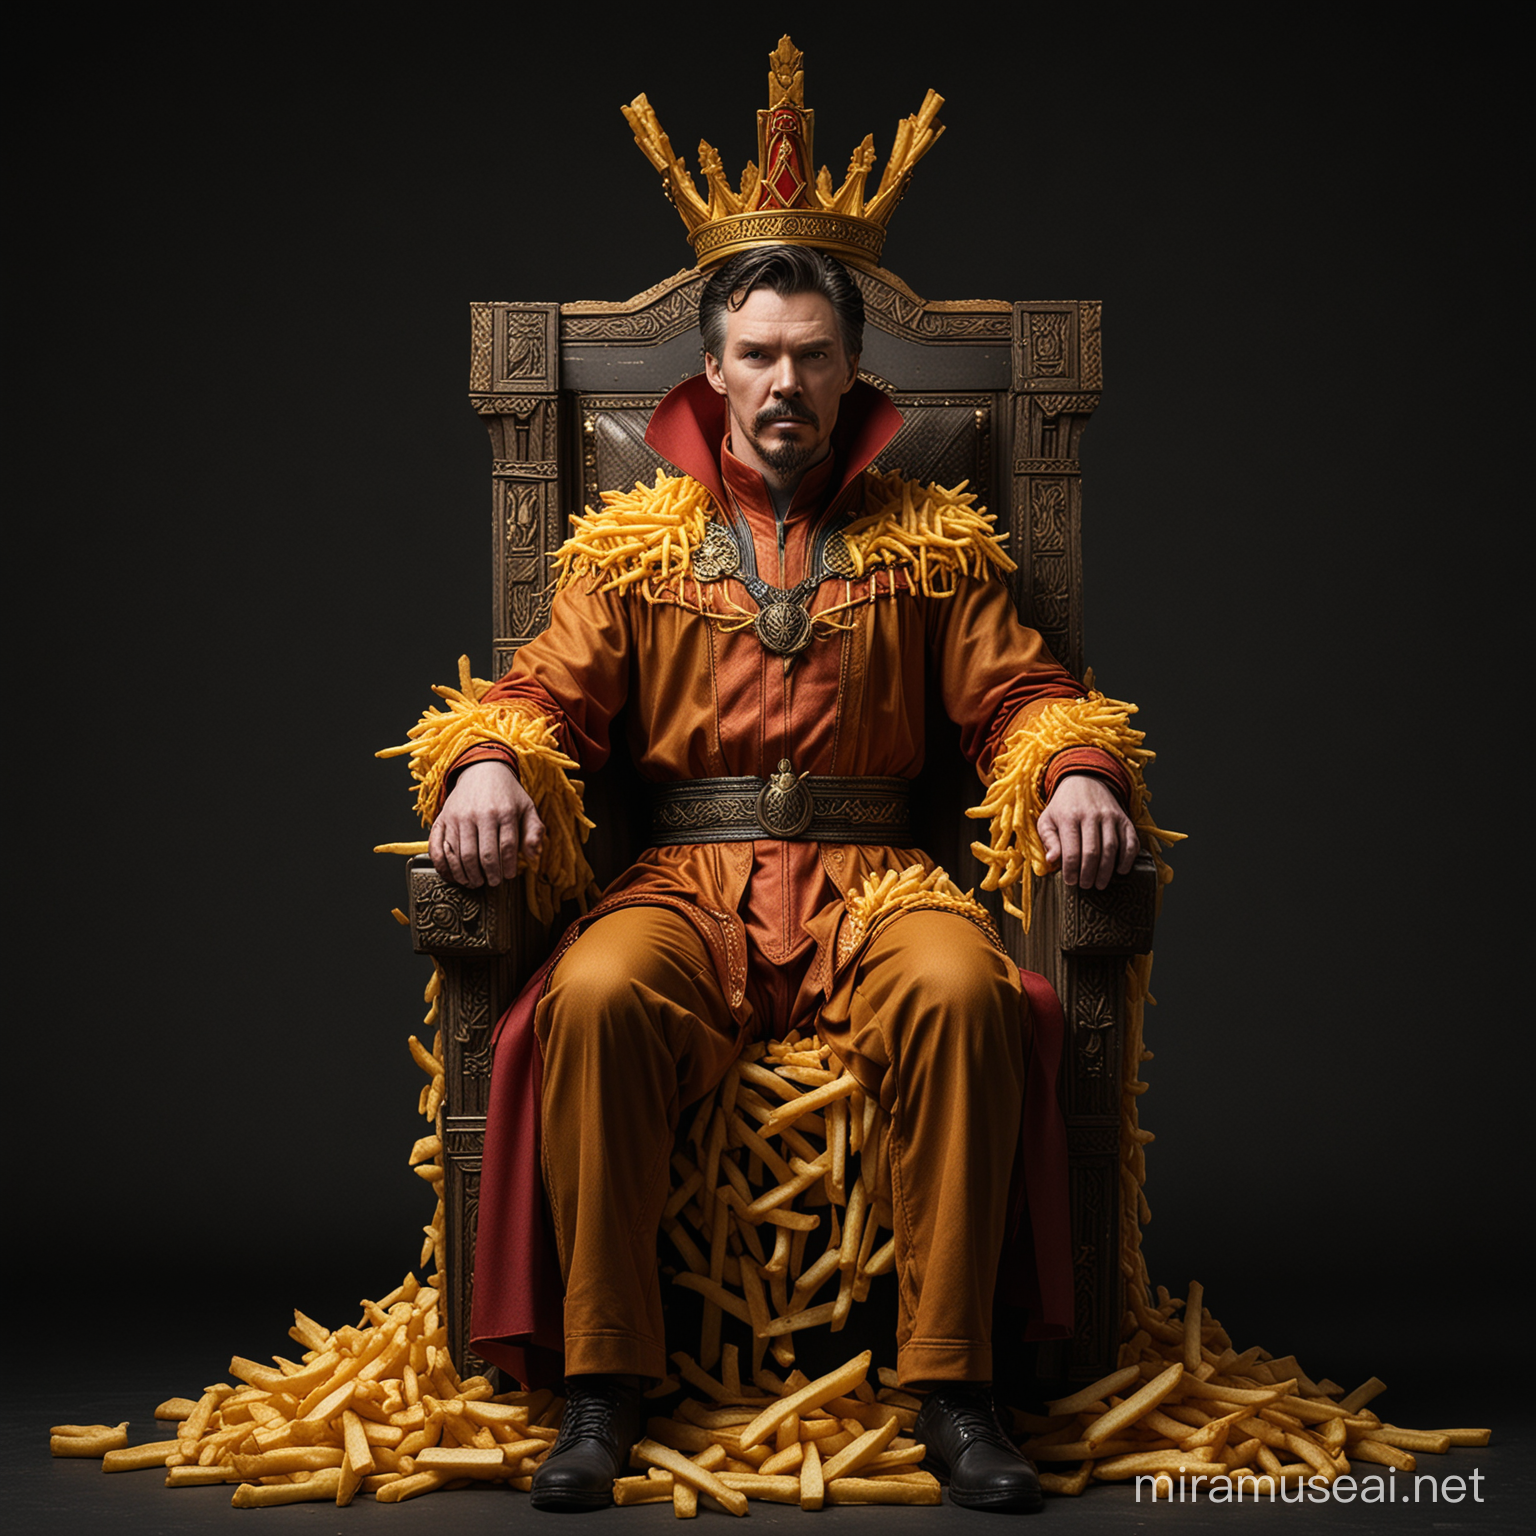 dr. strange in full body sitting in a throne made up of french fries with a crown made up of french fries, eating french fries, with black background for screen printing